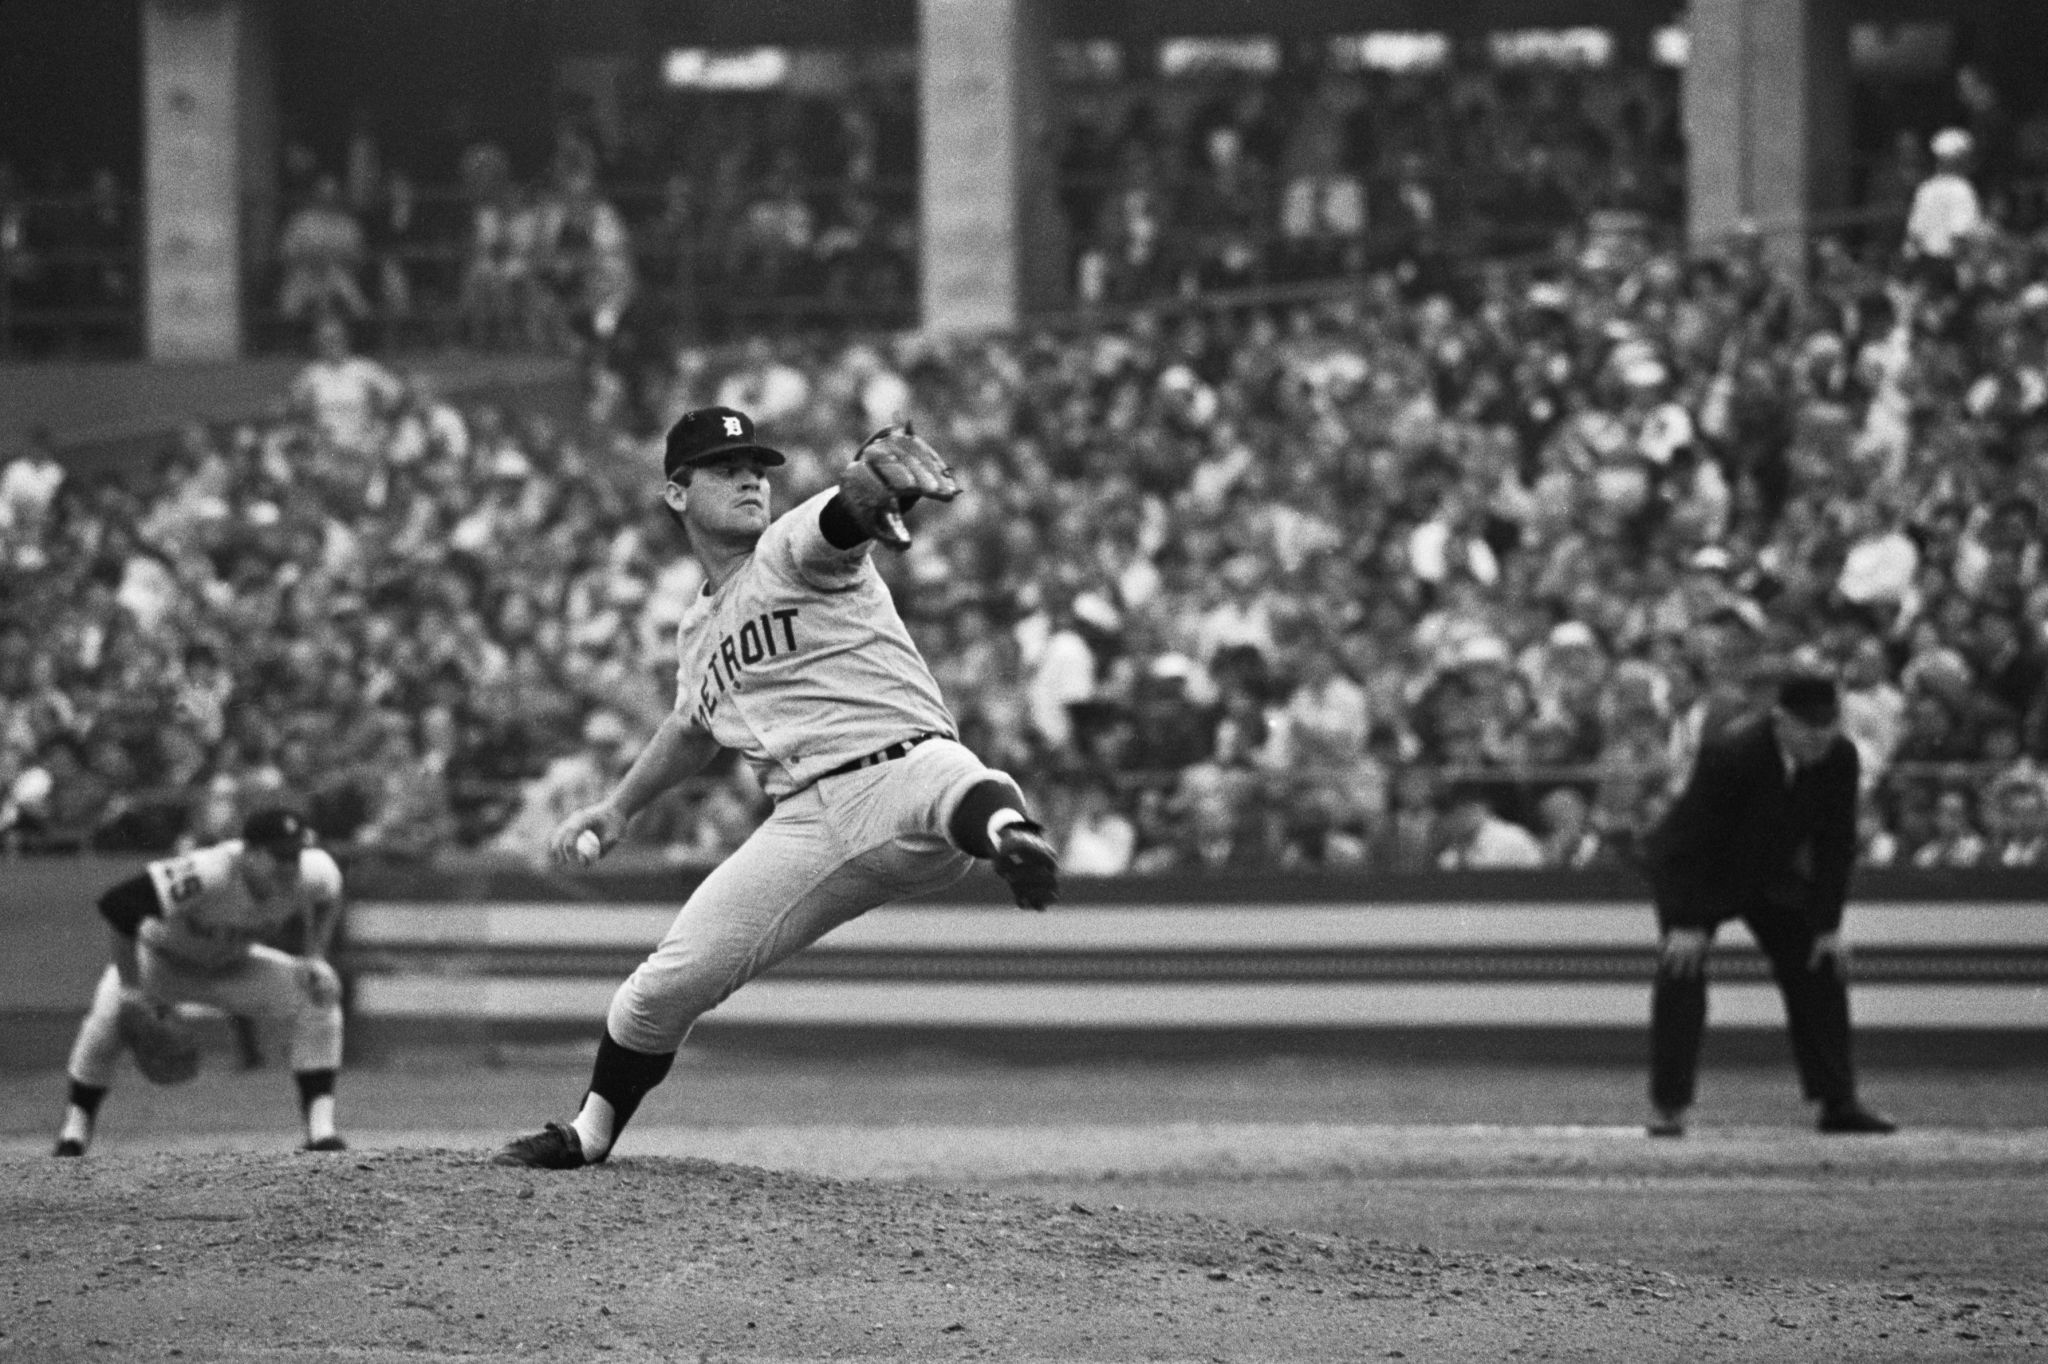 Bob Gibson fans 17 Tigers in Game 1 of 1968 World Series